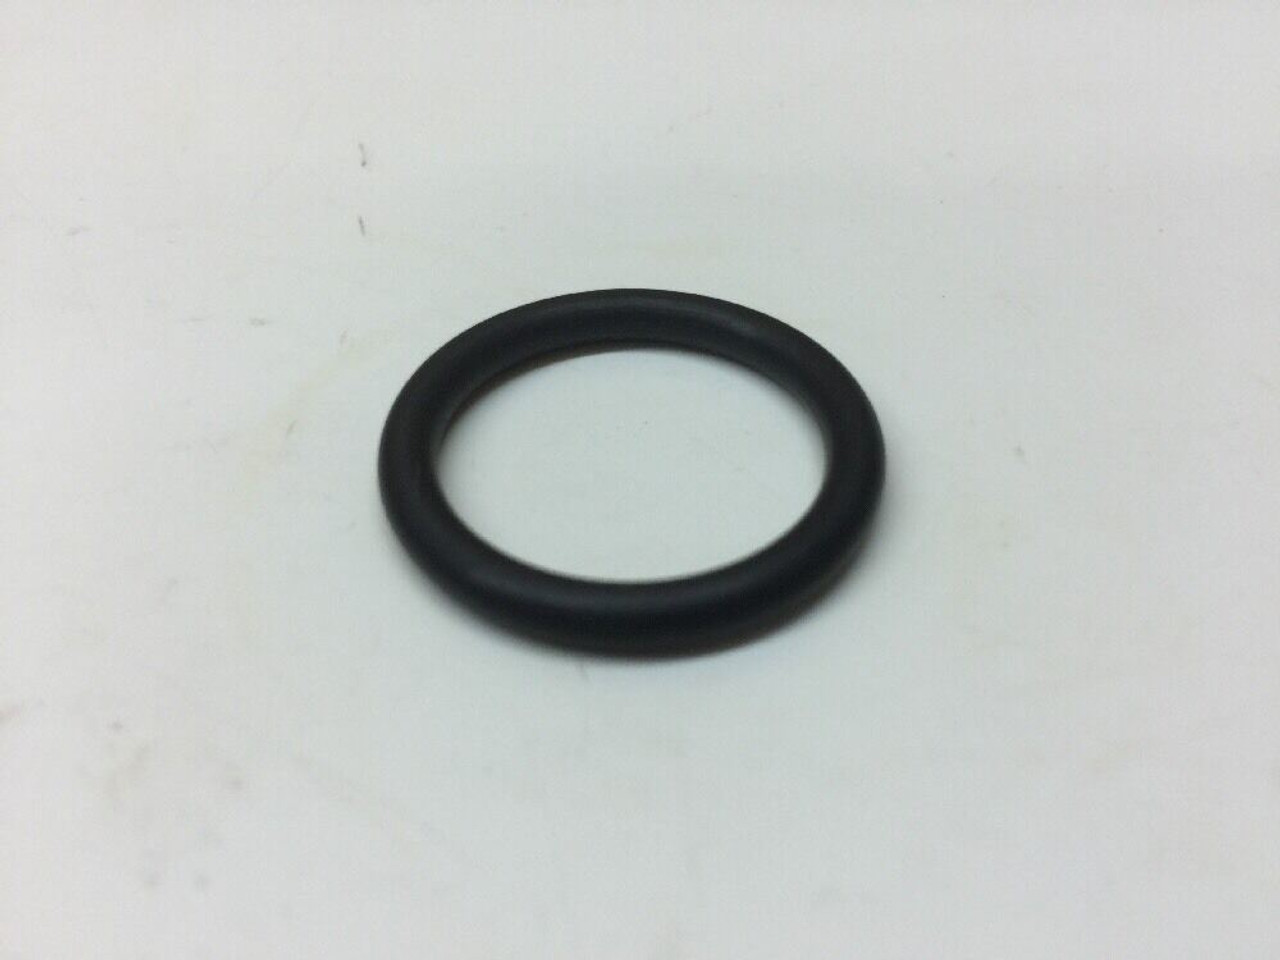 O-Ring M83461/1-213 SAE Black Rubber C-5 H-60 Aircraft Lot of 5